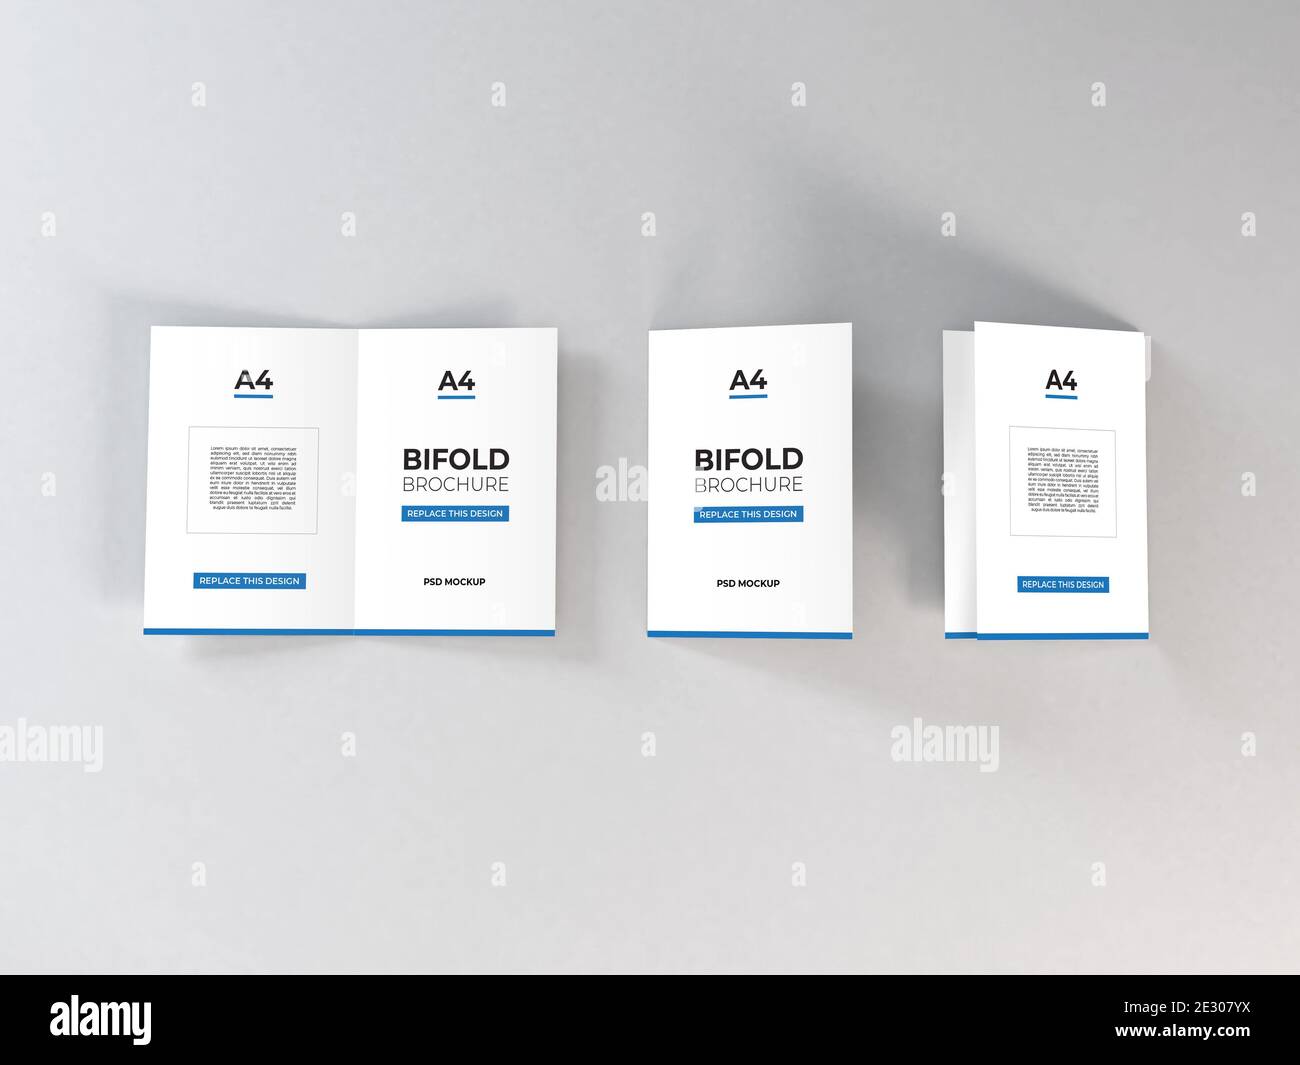 Download Realistic A4 Bifold Brochure Mockup Template Psd Stock Photo Alamy